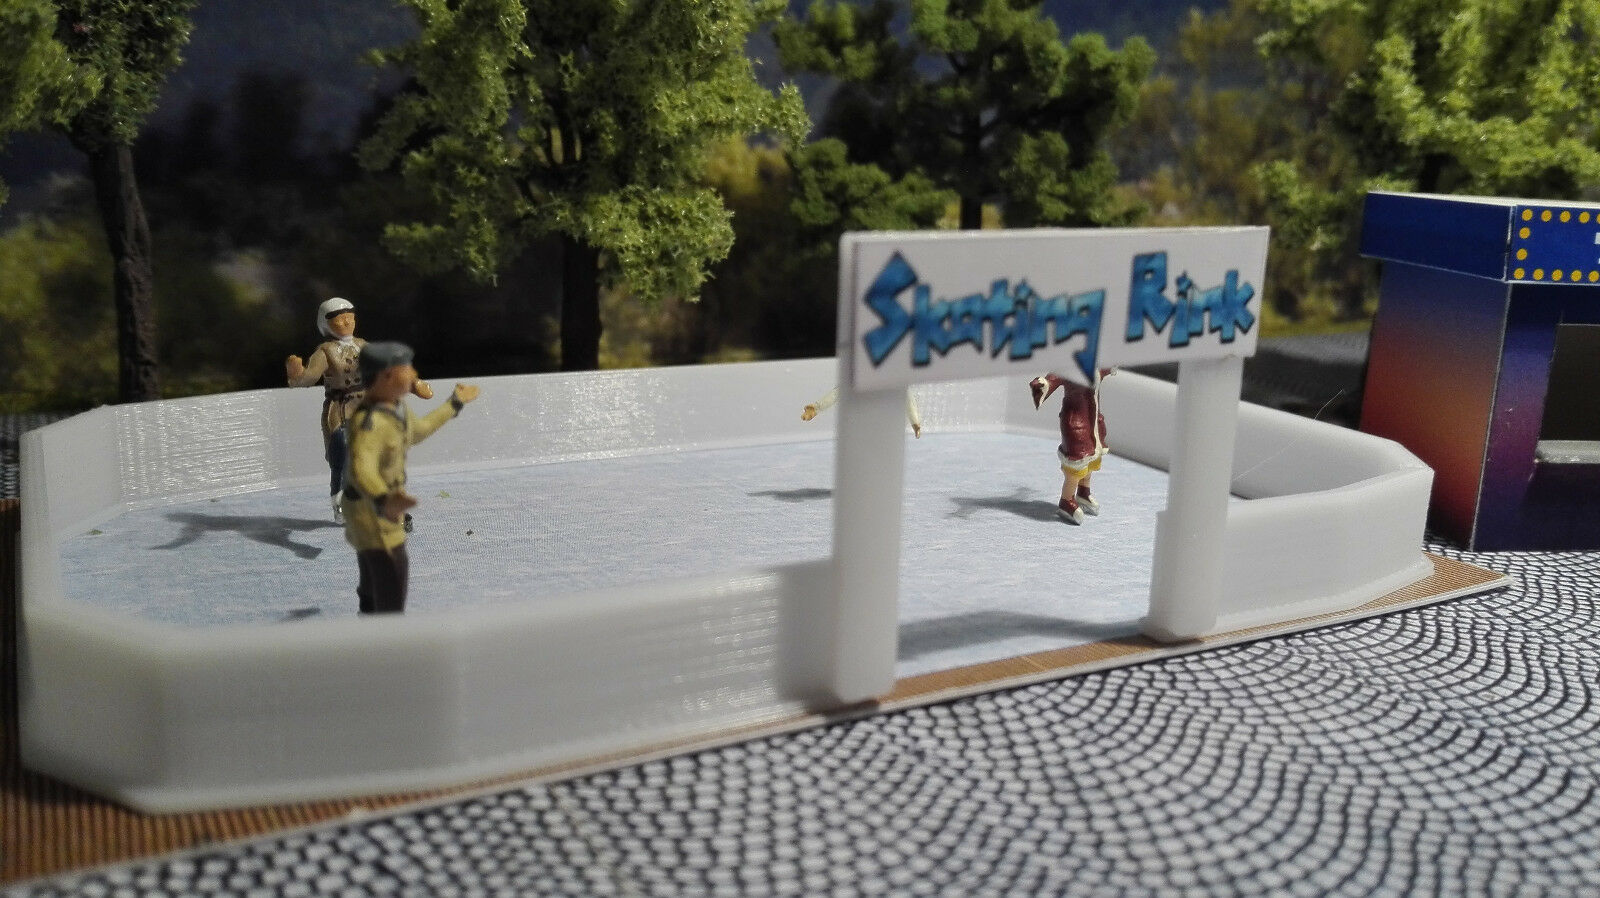 Skating Rink | H0 Scale 1:87 | Kit | Winter | Christmas